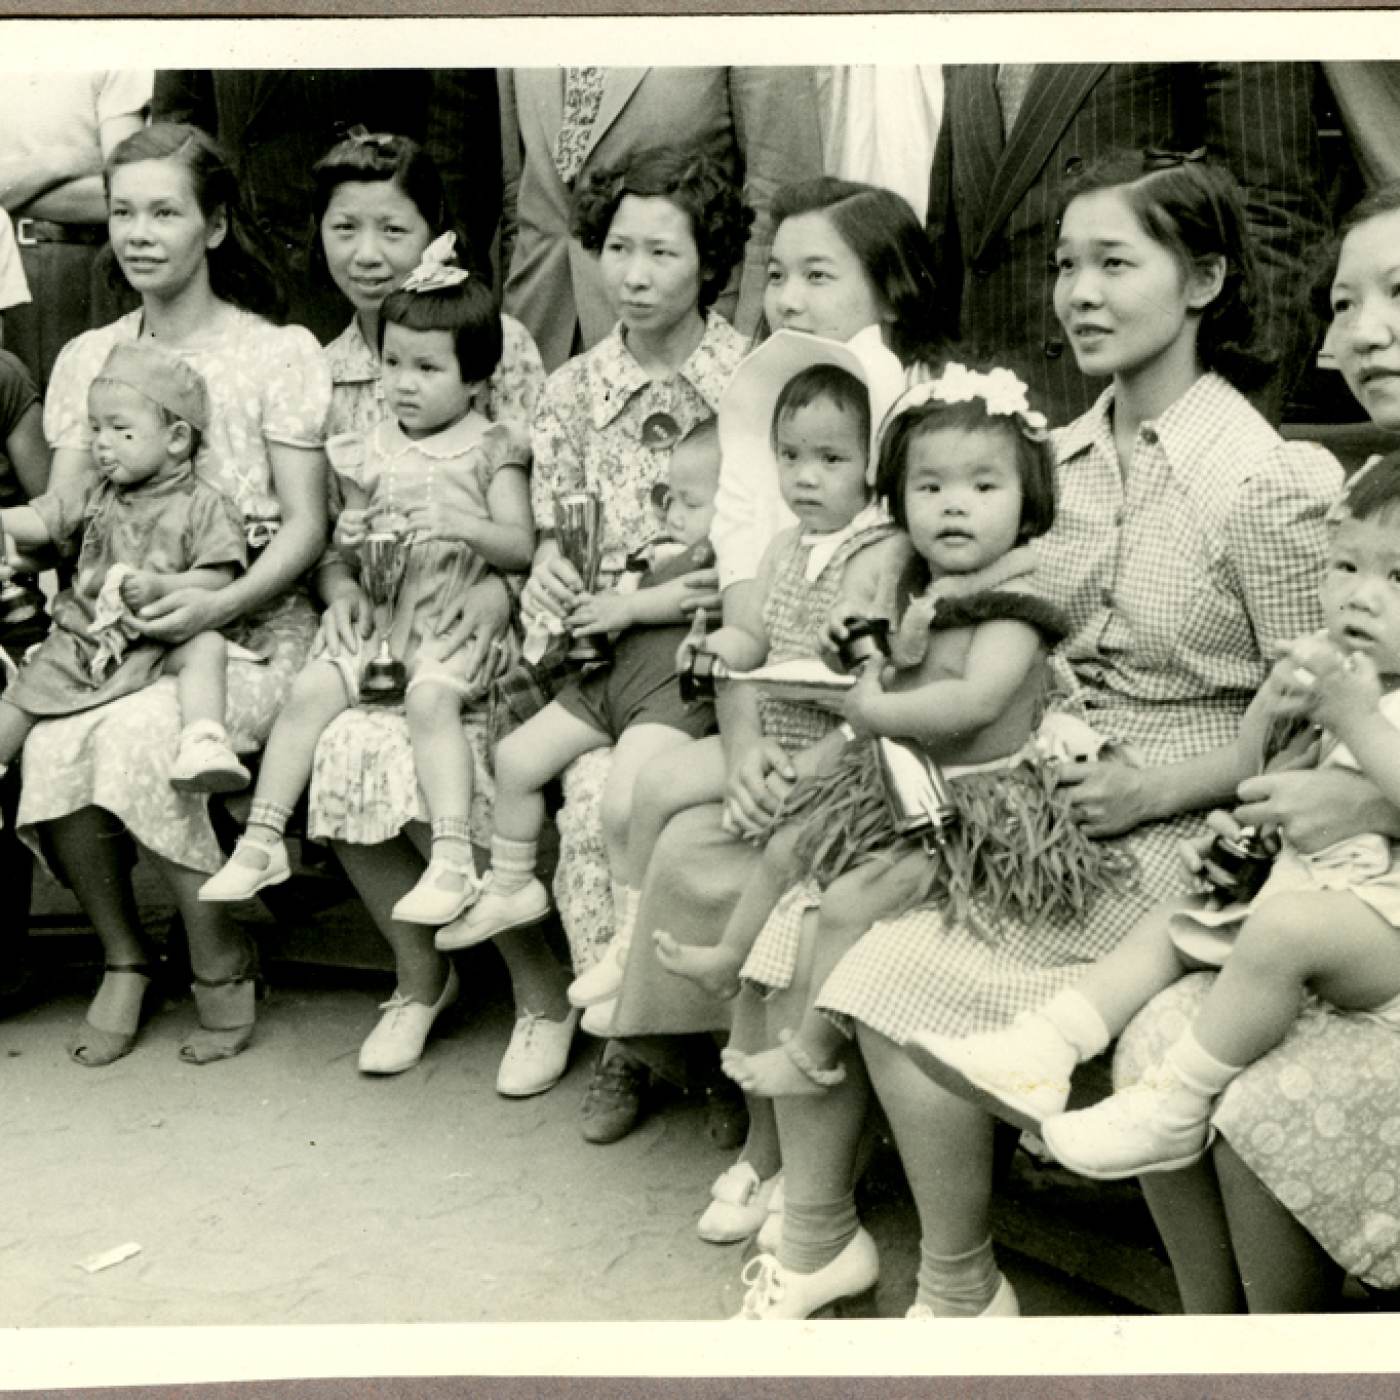 2012.002.002 A group photograph of the participants in the New York City Chinatown baby contest held on June 17, 1939 in Columbus park. Second from the right are mother and daughter Vivian Dai and Meling Dai (18 months). Third from the right are Meme Chen with her daughter Jaqueline Young (2 years). First from the left are May Moy with Patricia Moy (2 years). Third from left are Grace Lee Mok and her daughter Jade Mok, who won the prize for healthiest girl. Pictured at far right is Rose Lee Liu, wife of Dr. Arthur Liu, with her son Allan Liu. The Commissioner of Health and policemen, standing behind them, were the guests of honor. Courtesy of Meiling Dai, Museum of Chinese in America (MOCA) Collection. 1939年6月17日在哥伦布公园举行的纽约市唐人街婴儿比赛参赛者合影。右二是Vivian Dai 和Meling Dai（18个月）和她们的妈妈。右三是 Chen女士 和她的女儿 Jaqueline Young（2 岁）。左起第一是 May Moy 和 Patricia Moy（2 岁）。左三是Grace Lee Mok和她的女儿Jade Mok，她获得了最健康女孩奖。最右边的照片是 Arthur Liu 博士的妻子 Rose Lee Liu 和她的儿子 Allan Liu。站在他们身后的卫生署署长和警察是贵宾。由Meiling Dai捐赠，美国华人博物馆（MOCA）馆藏。